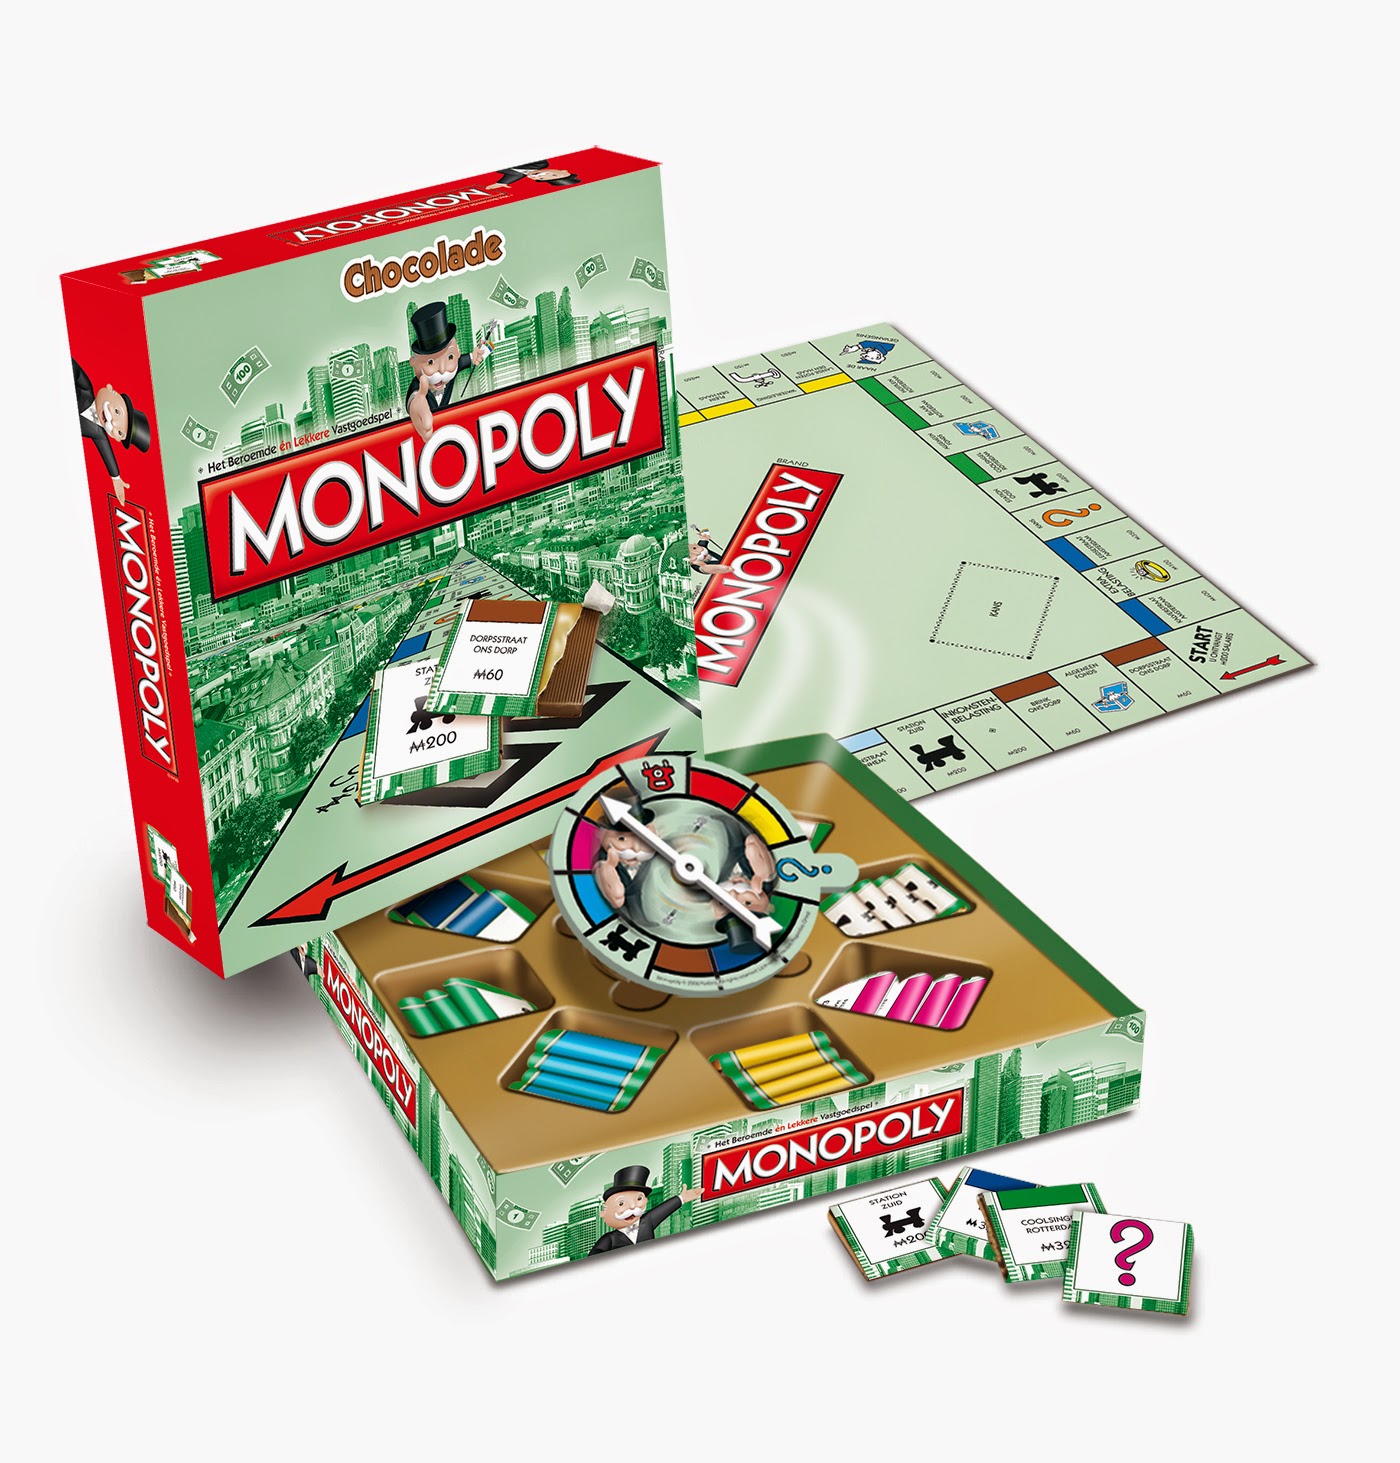 classic monopoly pc game